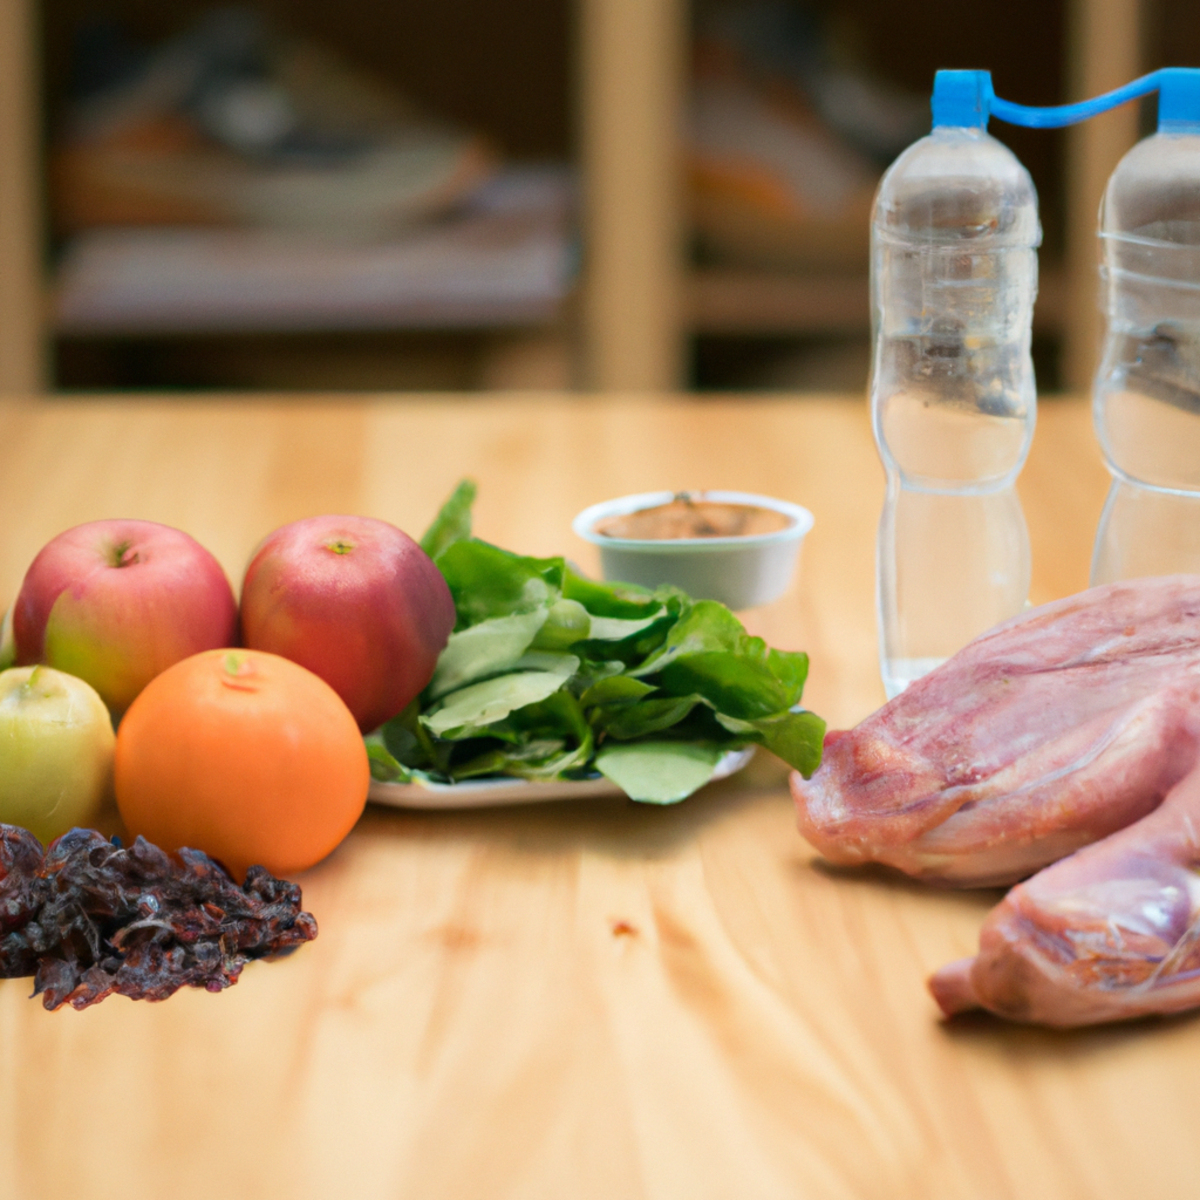 Healthy foods, running shoes, water bottle, and lung image - Alpha-1 Antitrypsin Deficiency